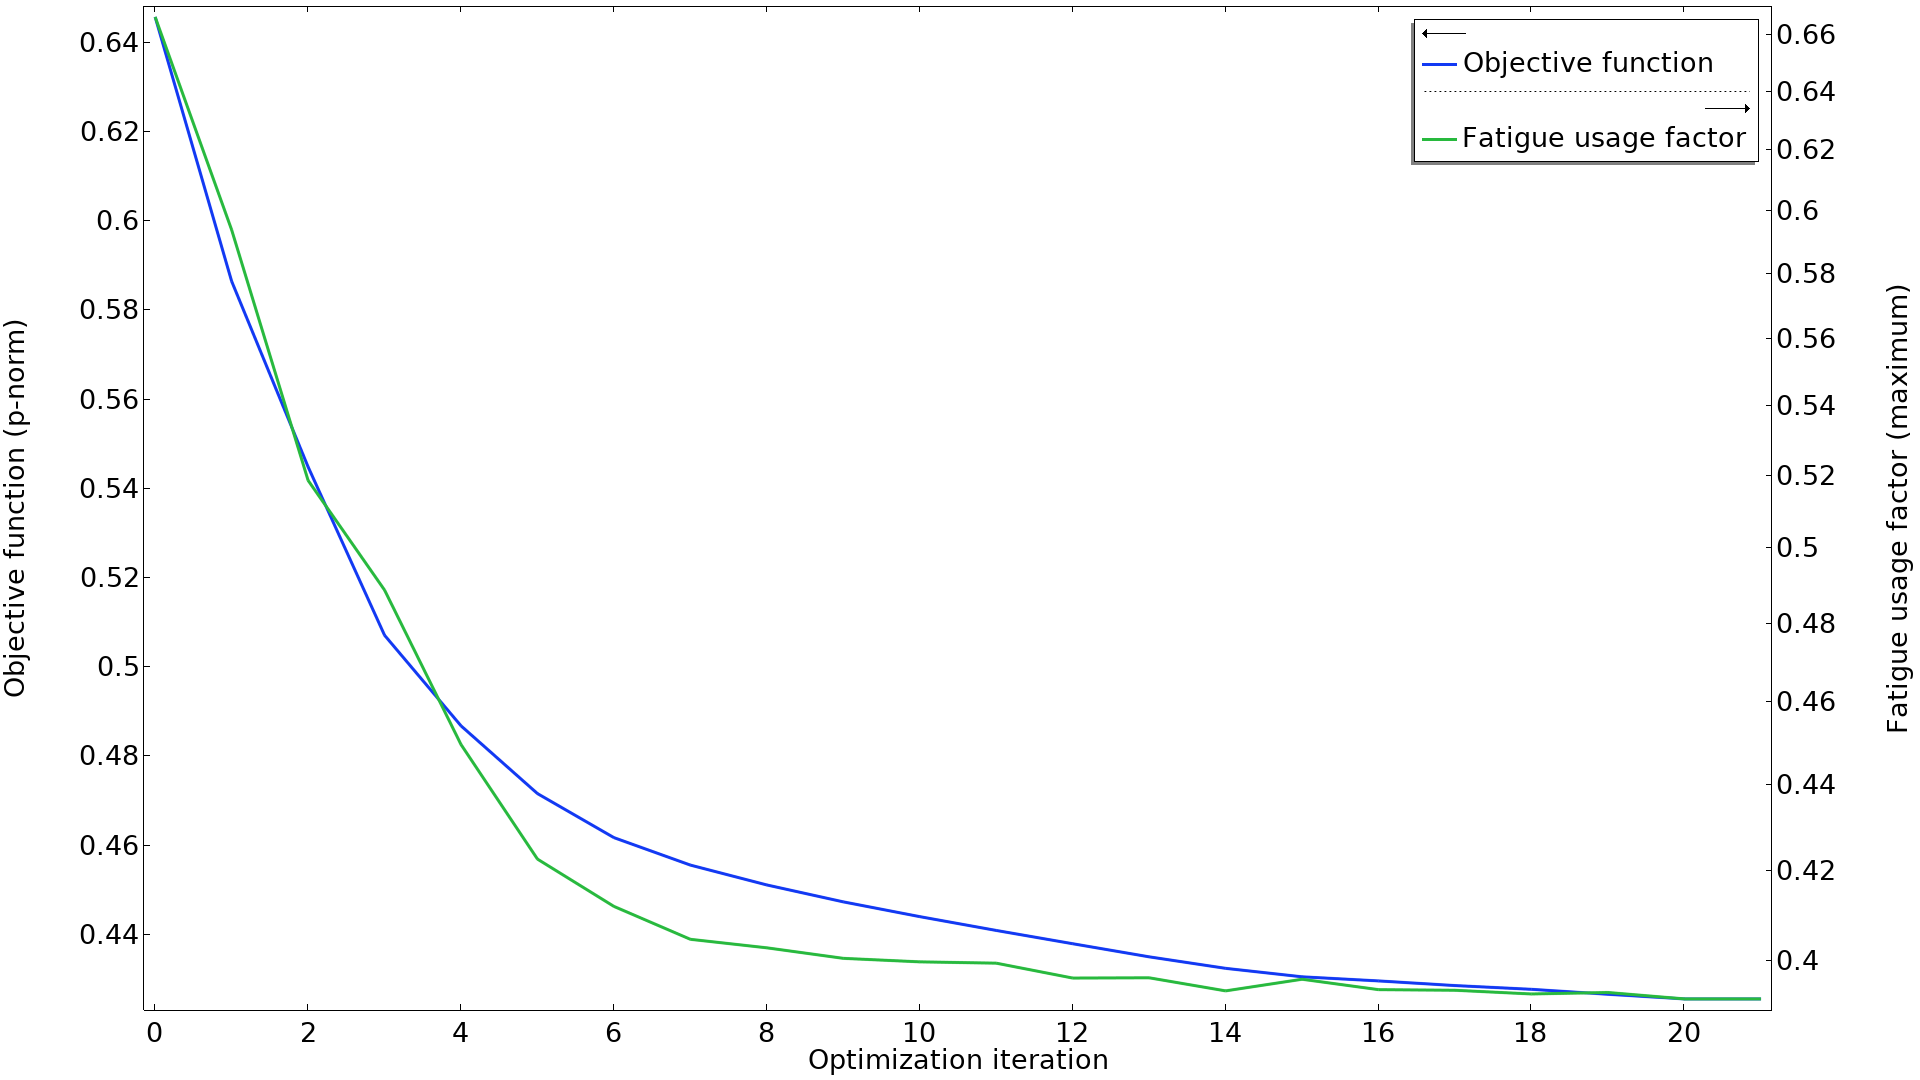 A 2D plot of the p-norm objective (blue line) and the fatigue usage factor (green line) over the optimization iterations shows that the two are strongly correlated.